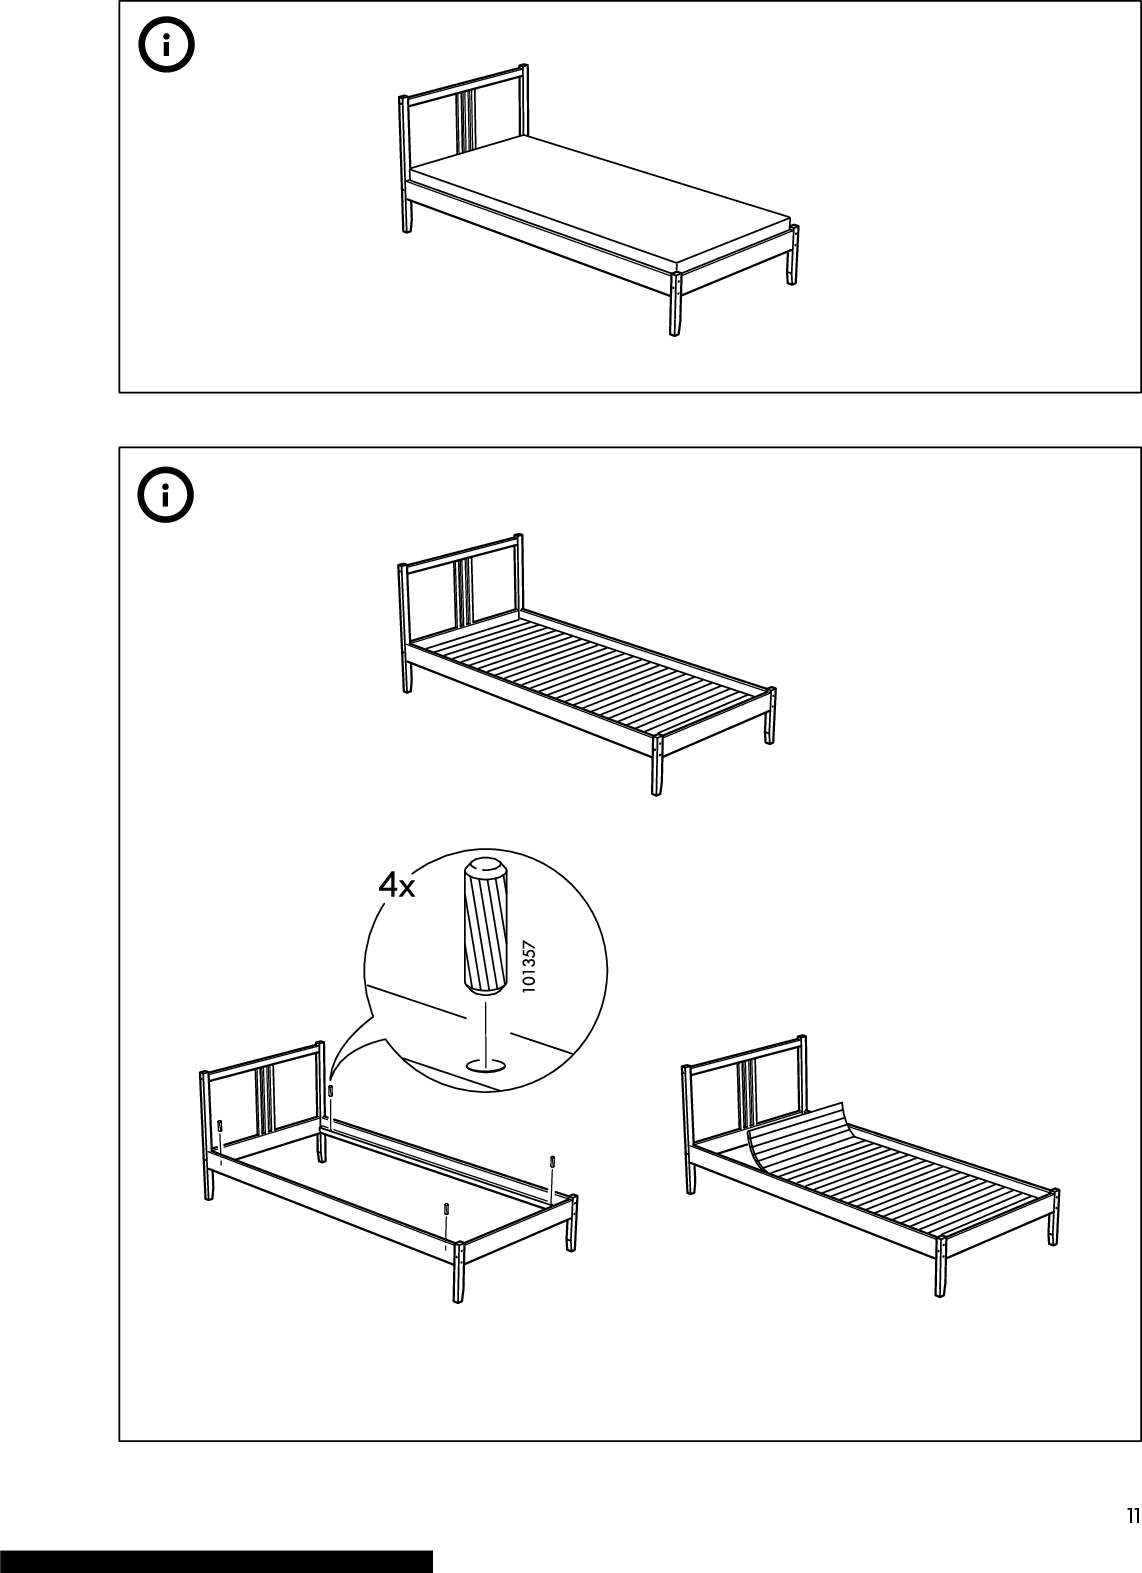 Page 12 of 12 - Ikea Ikea-Fjellse-Bed-Frame-Tw-Instructions-Manual-822426 ManualsLib - Makes It Easy To Find Manuals Online! User Manual